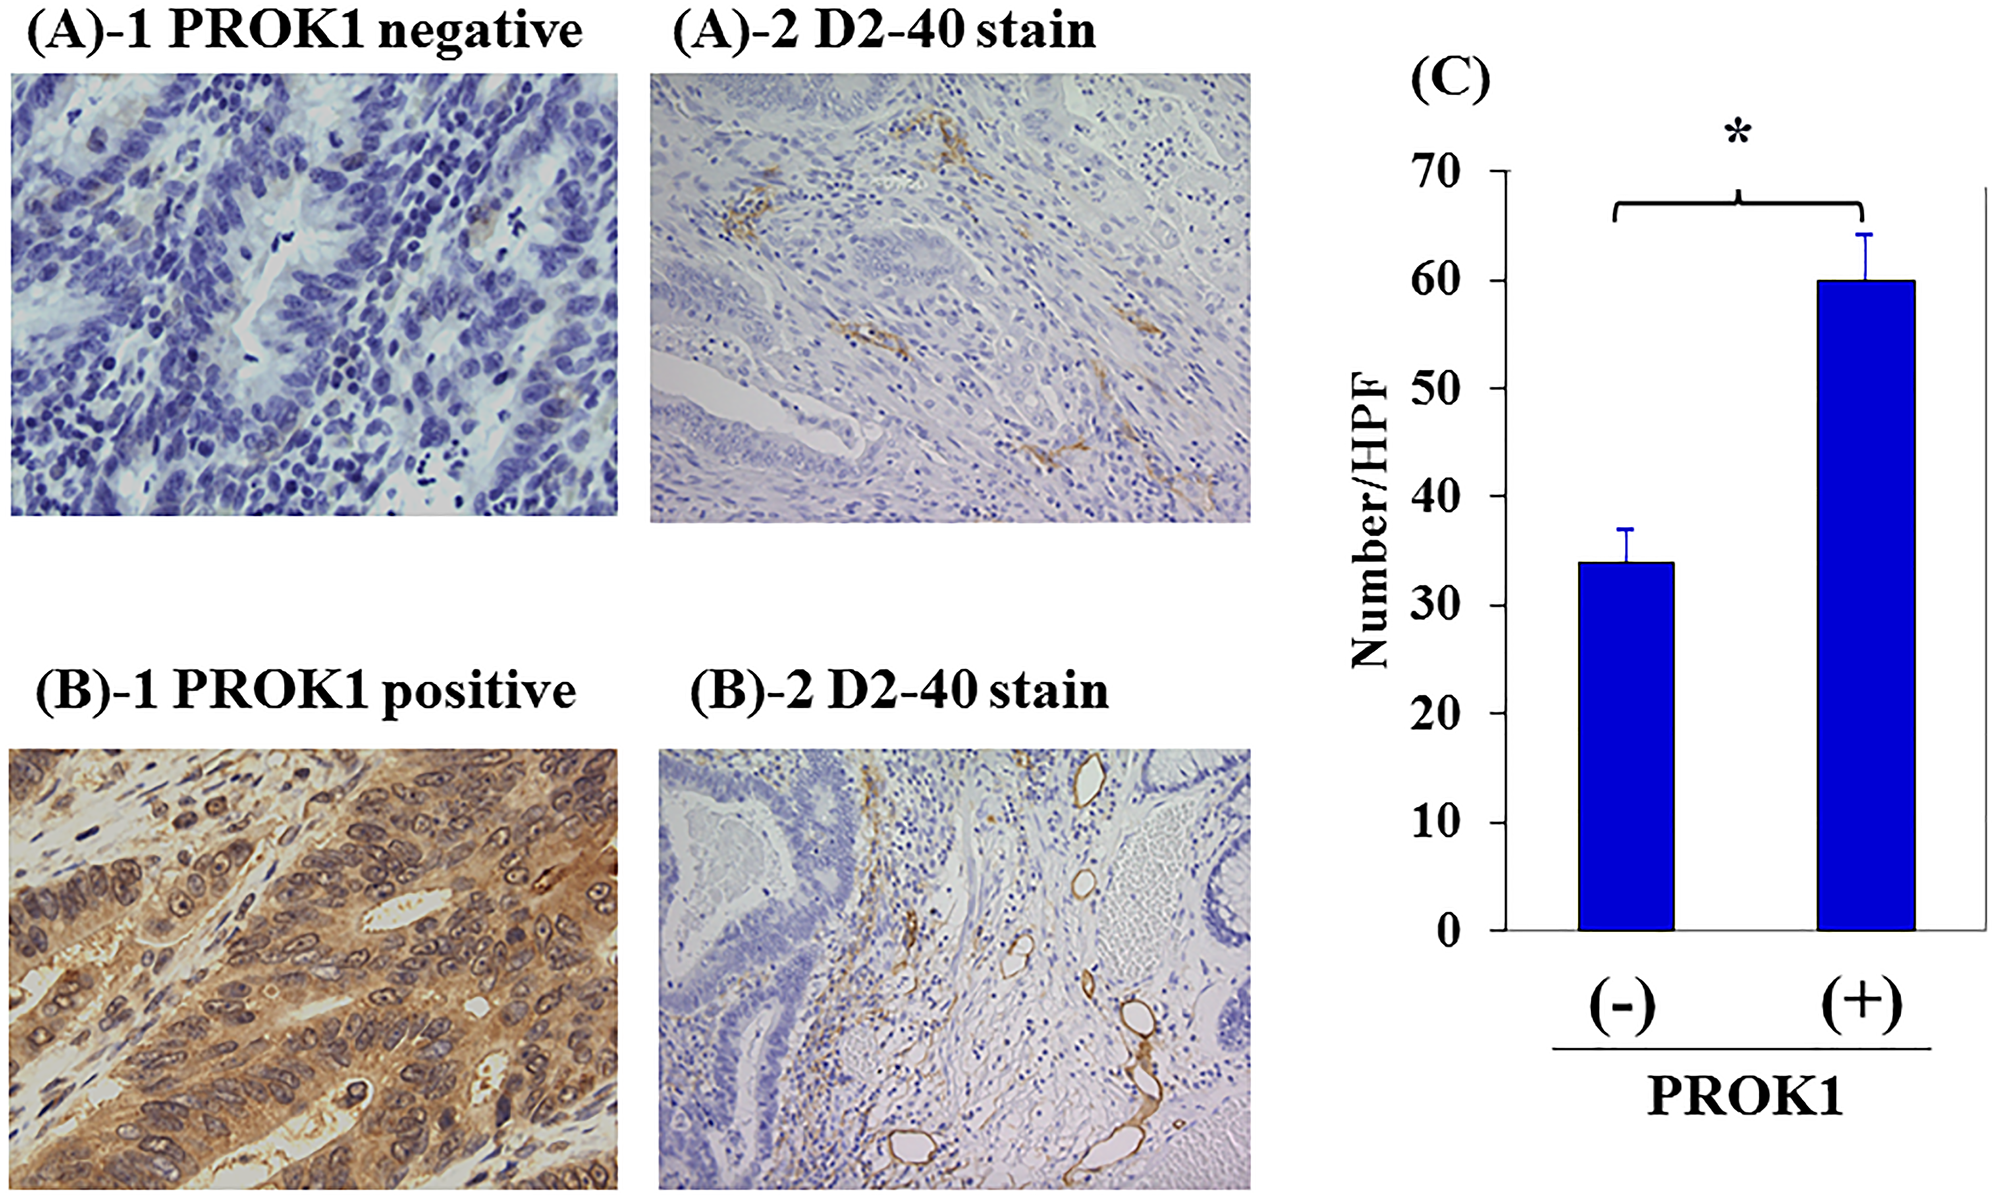 Figure 5: Lymph vessels in human primary colorectal cancer by immunohistochemical staining with anti-D2-40 mAb.